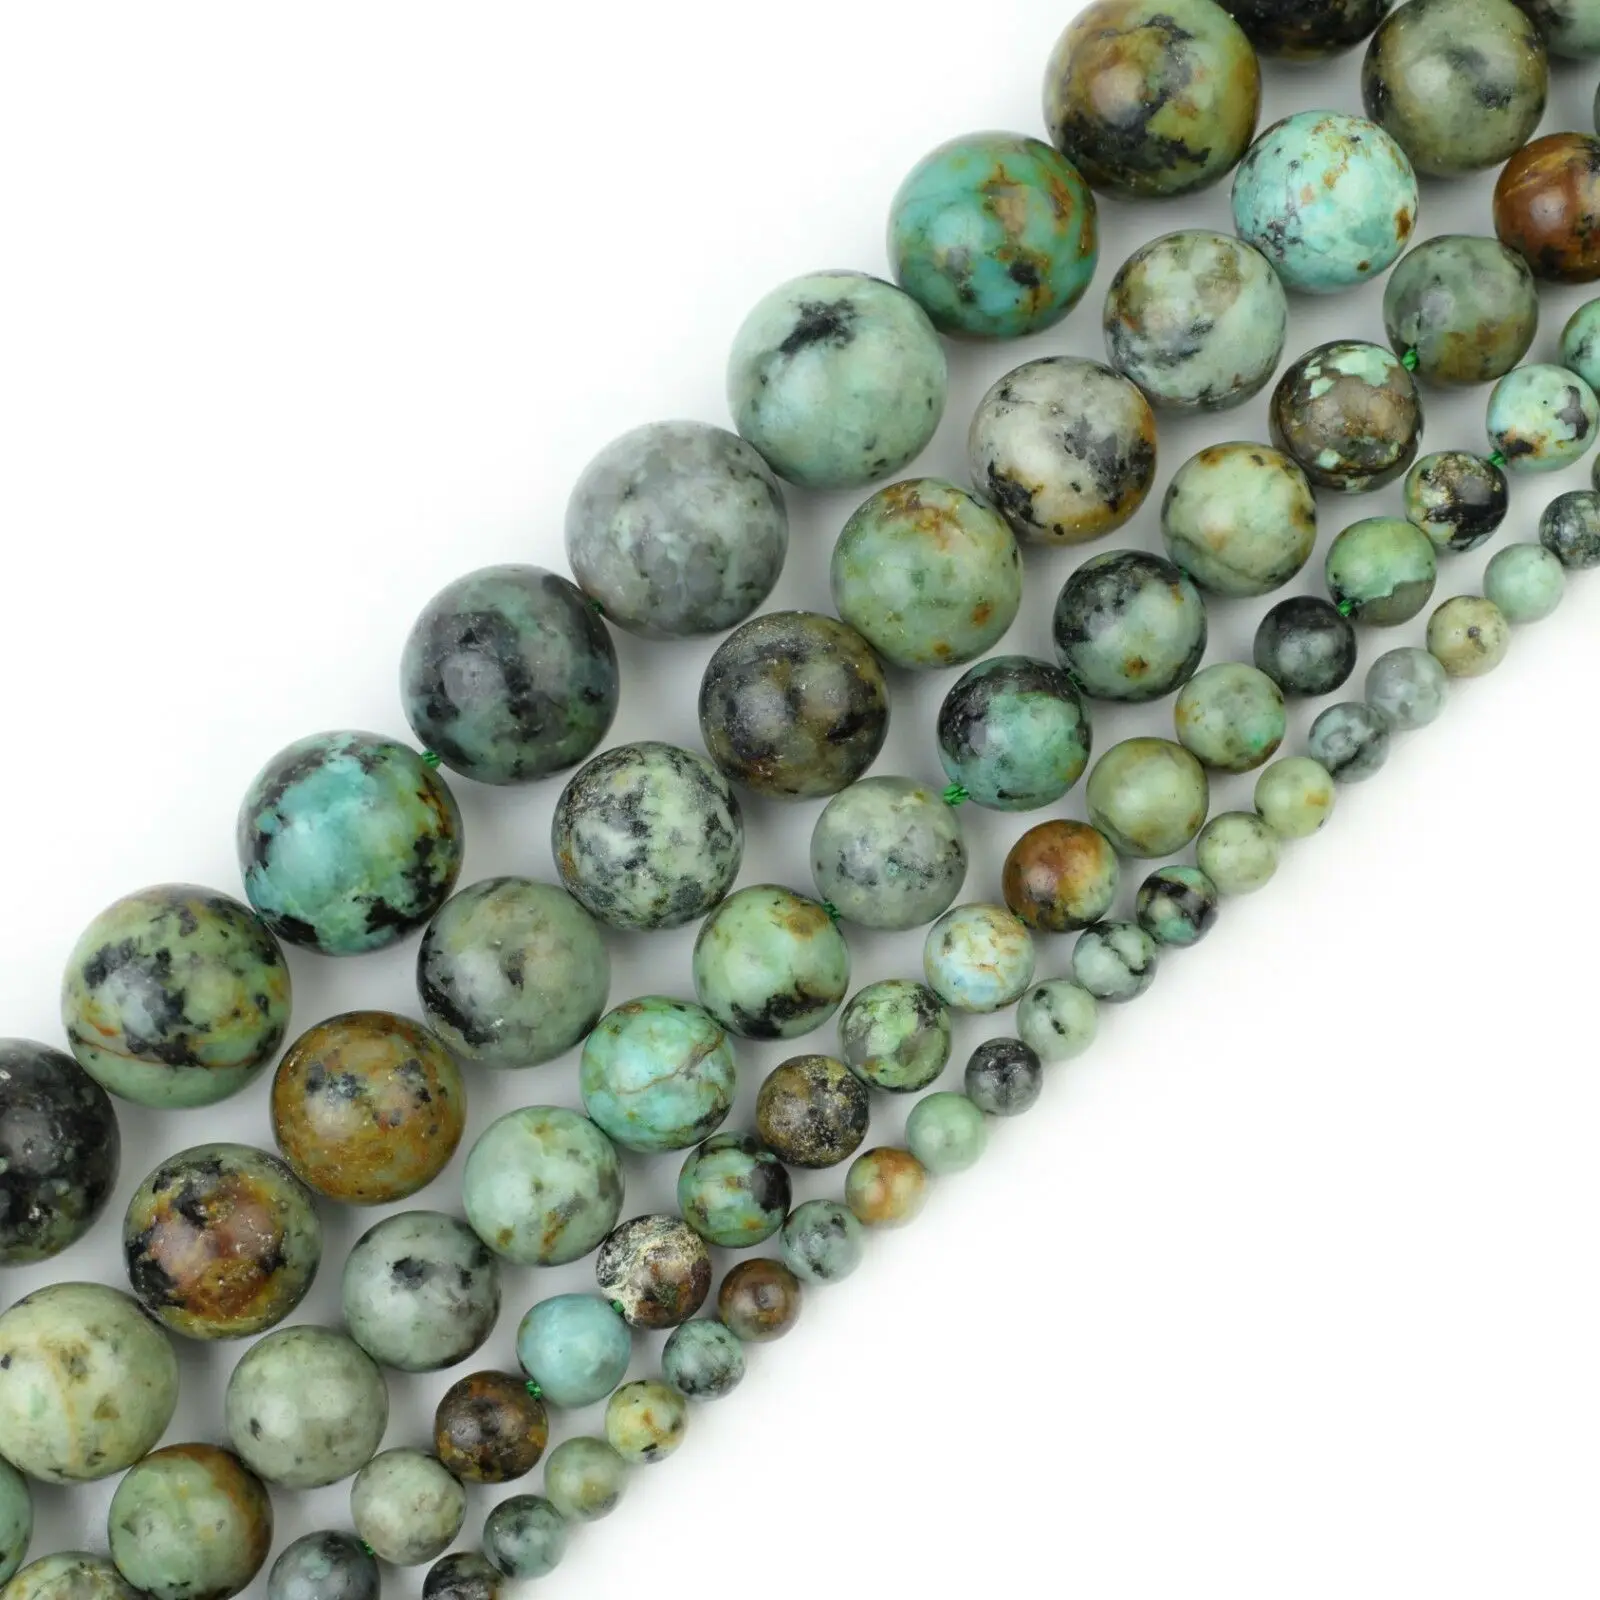 

Natural African Turquoise Stone Jewellery String, Round Loose Beads for DIY Jewelry Making, 1 String/15 Inches